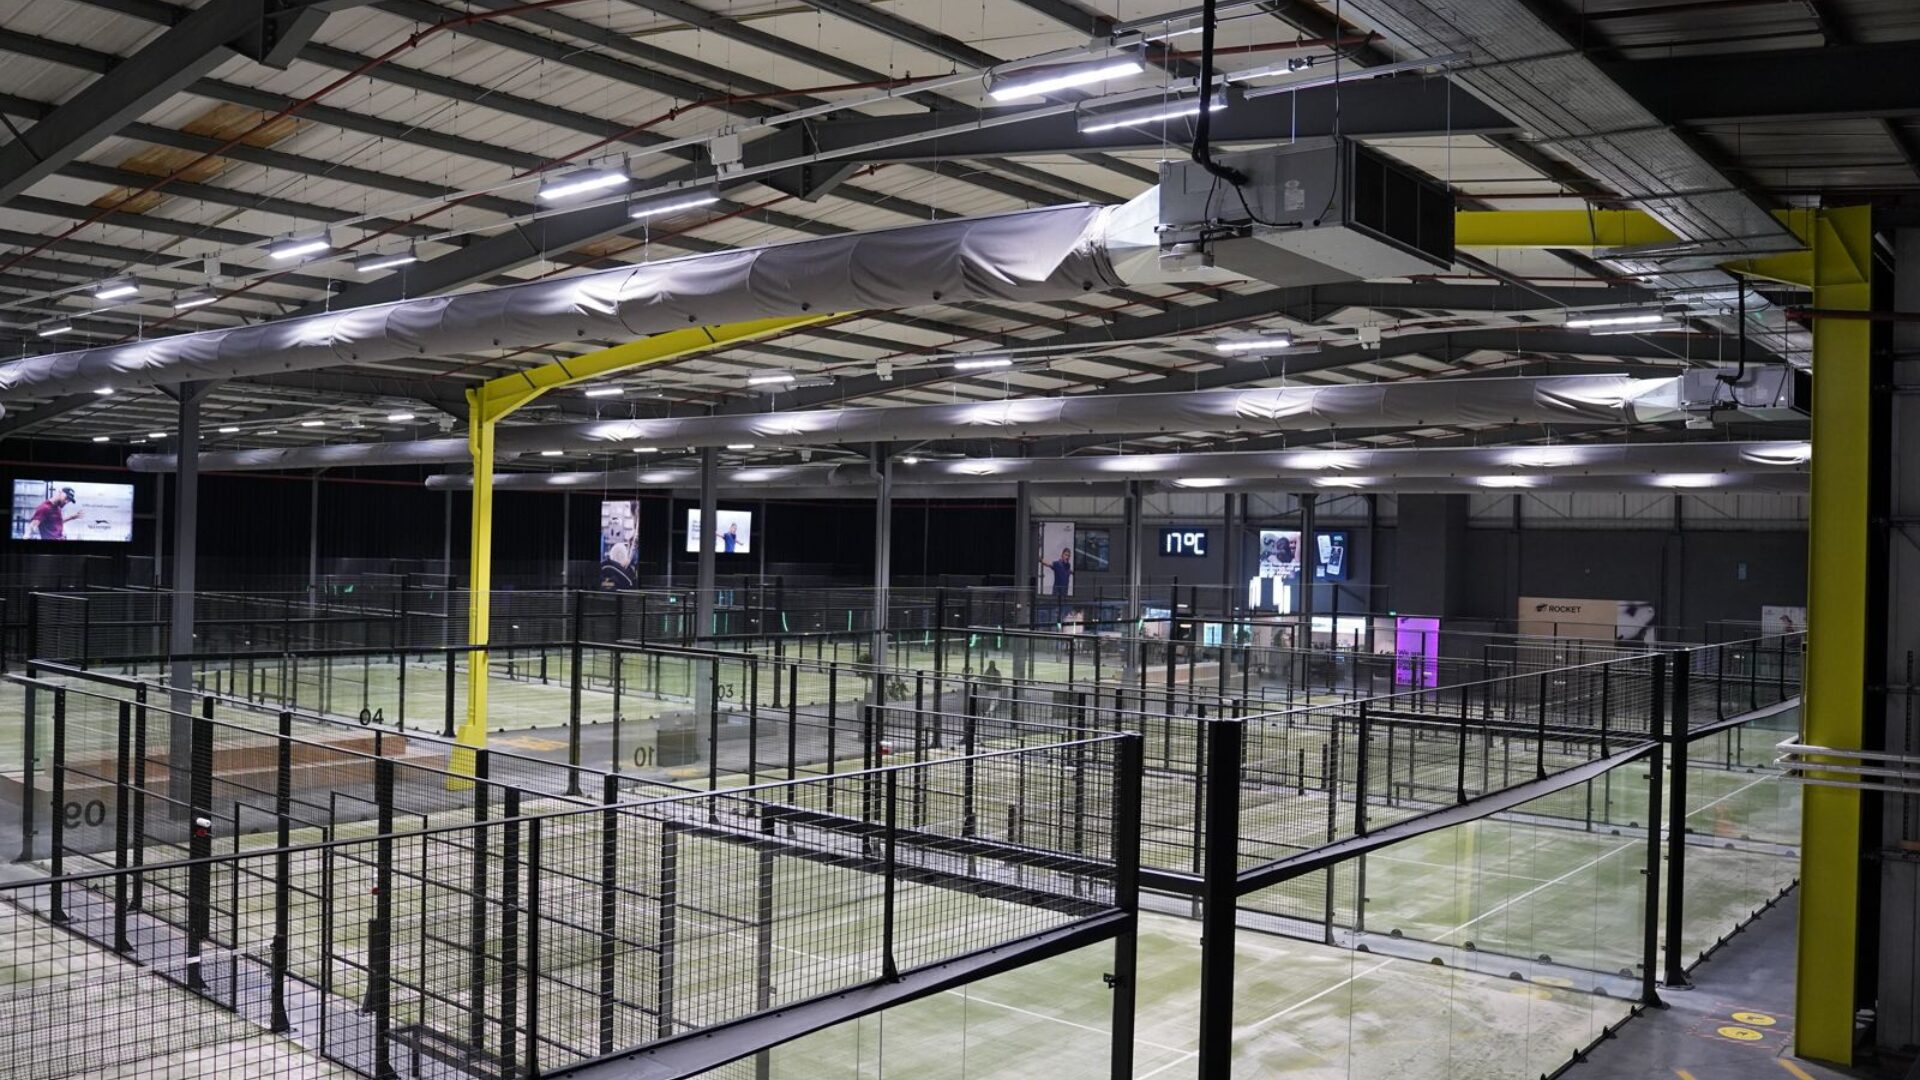 The biggest club in padel indoor in London is about to open its doors